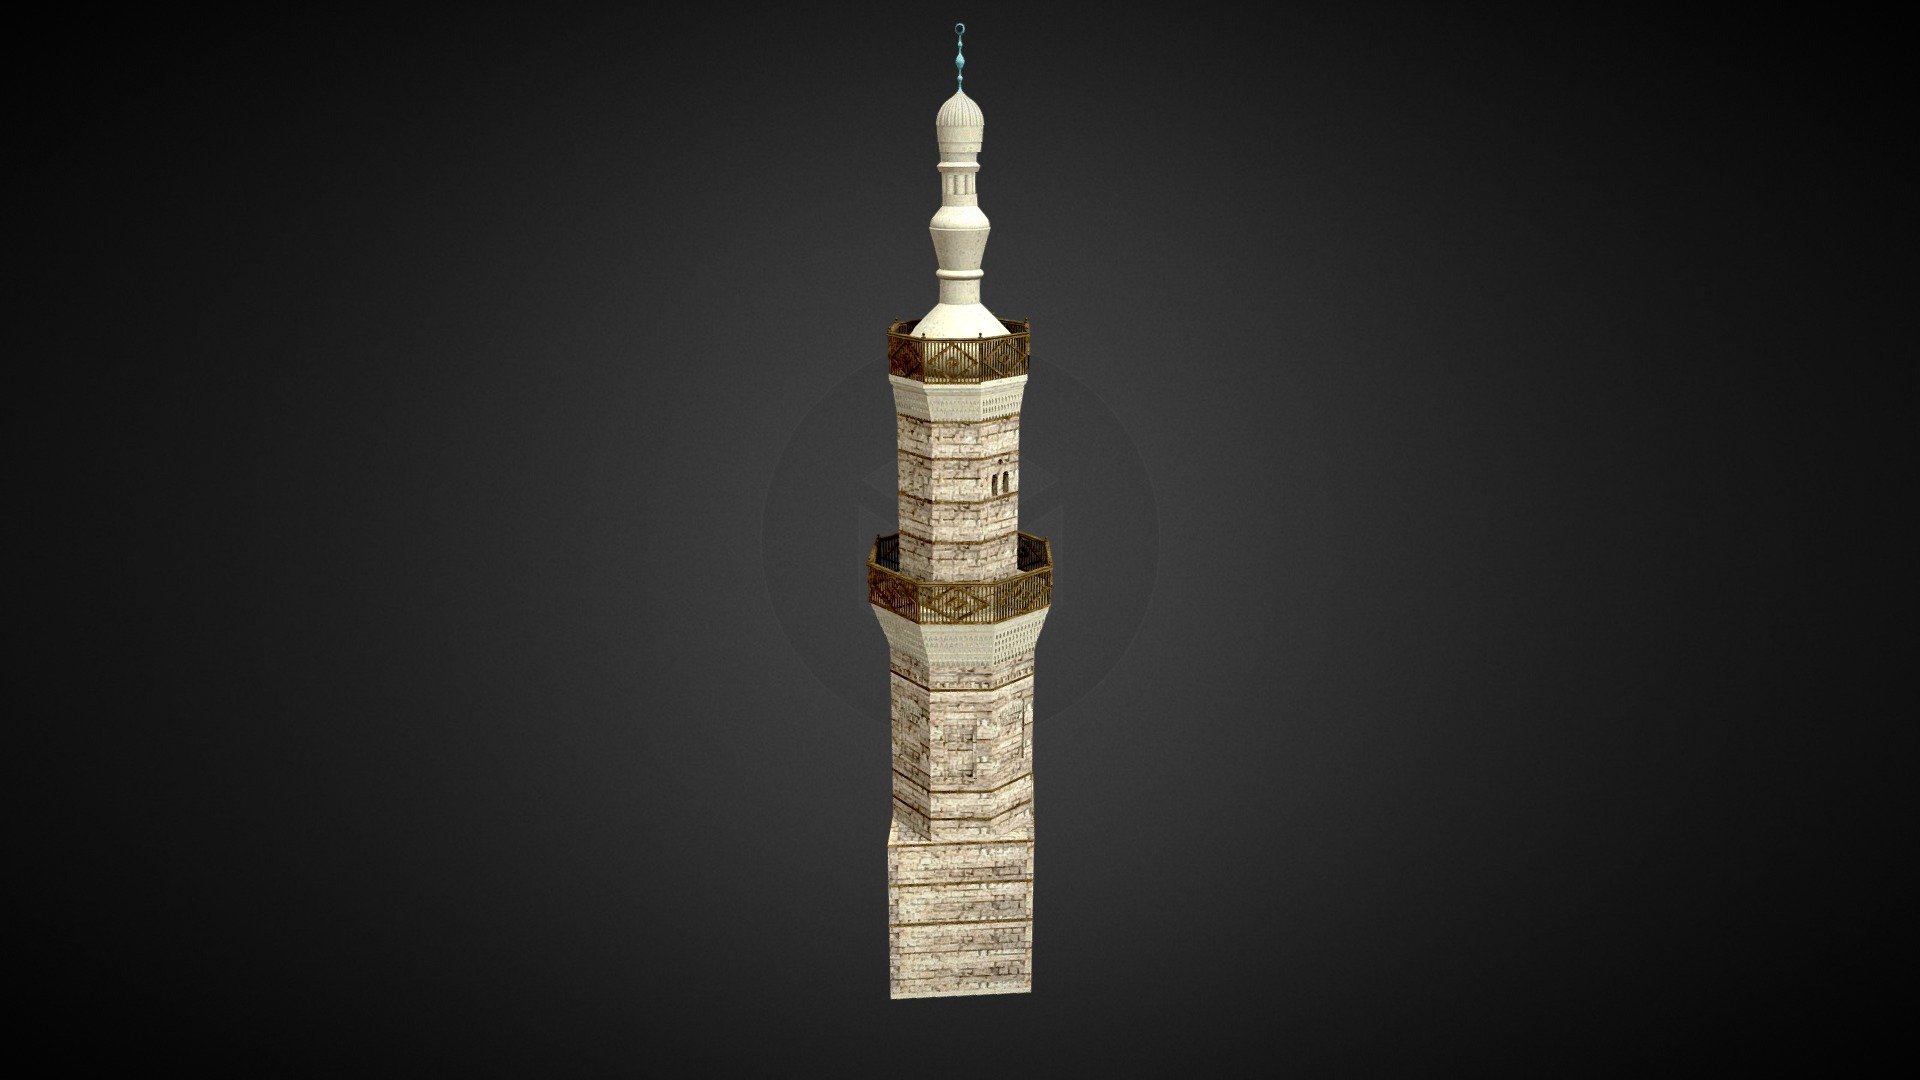 Al Shafei mosque is considered as one of the ancient mosques in Jeddah city located in Saudi Arabia, where its minaret was built in the 7th century AH, corresponding to the 13th century AD.

The minaret is considered the oldest in the Hijaz area, which is located in the northeastern corner of the Mosque.

The architecture style of the minaret construction dates back to the Ayyubid era 3d model